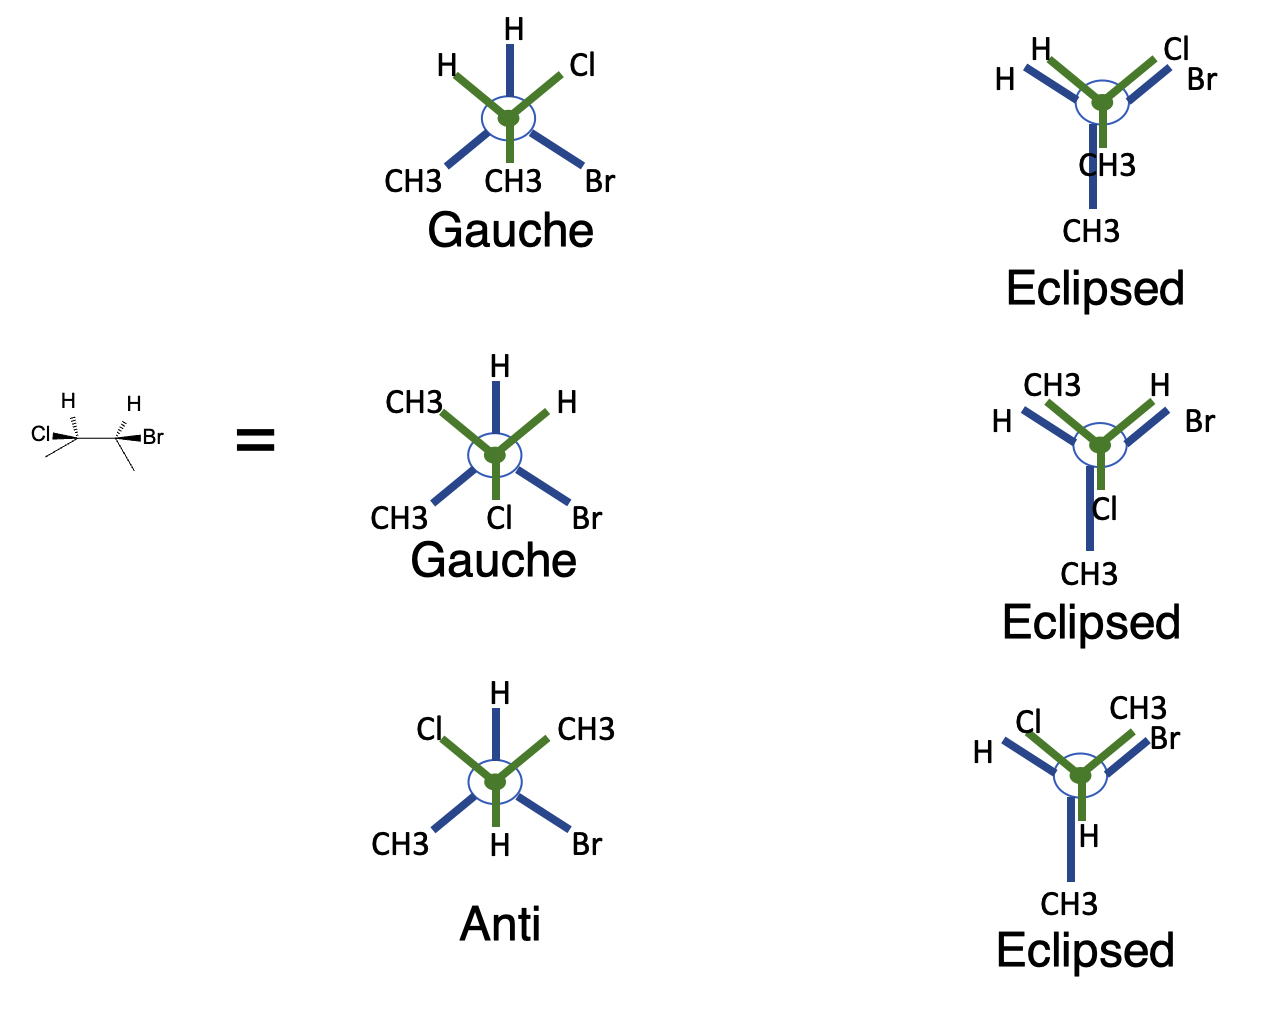 Conformational Analysis and Stability - gauche eclipsed anti